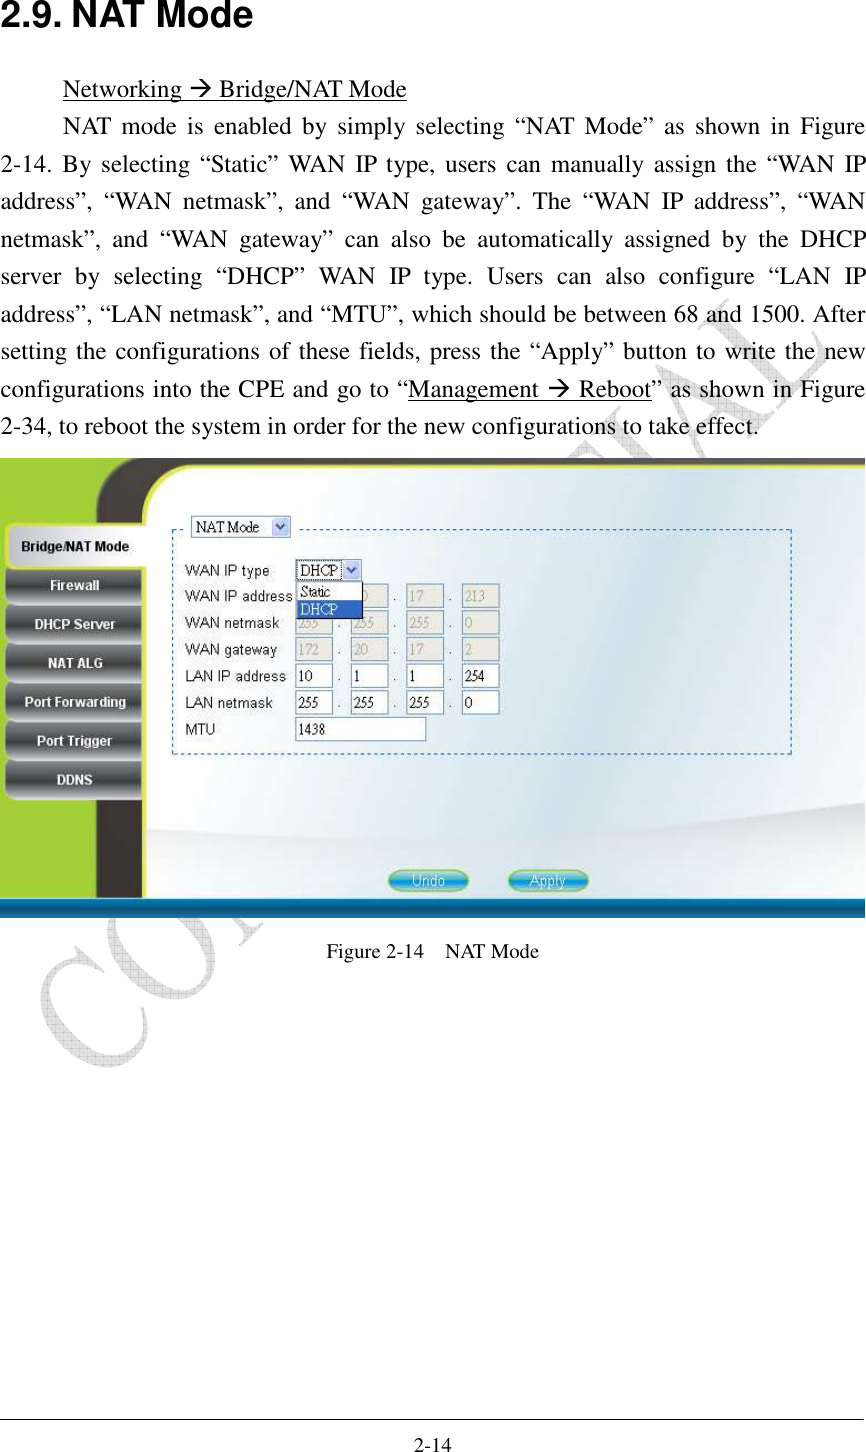    2-14 2.9. NAT Mode Networking  Bridge/NAT Mode NAT mode  is  enabled  by  simply  selecting  “NAT  Mode”  as  shown  in  Figure 2-14. By selecting “Static” WAN  IP  type, users can manually assign the  “WAN  IP address”,  “WAN  netmask”,  and  “WAN  gateway”.  The  “WAN  IP  address”,  “WAN netmask”,  and  “WAN  gateway”  can  also  be  automatically  assigned  by  the  DHCP server  by  selecting  “DHCP”  WAN  IP  type.  Users  can  also  configure  “LAN  IP address”, “LAN netmask”, and “MTU”, which should be between 68 and 1500. After setting the configurations of these fields, press the “Apply” button to write the new configurations into the CPE and go to “Management  Reboot” as shown in Figure 2-34, to reboot the system in order for the new configurations to take effect.  Figure 2-14    NAT Mode  